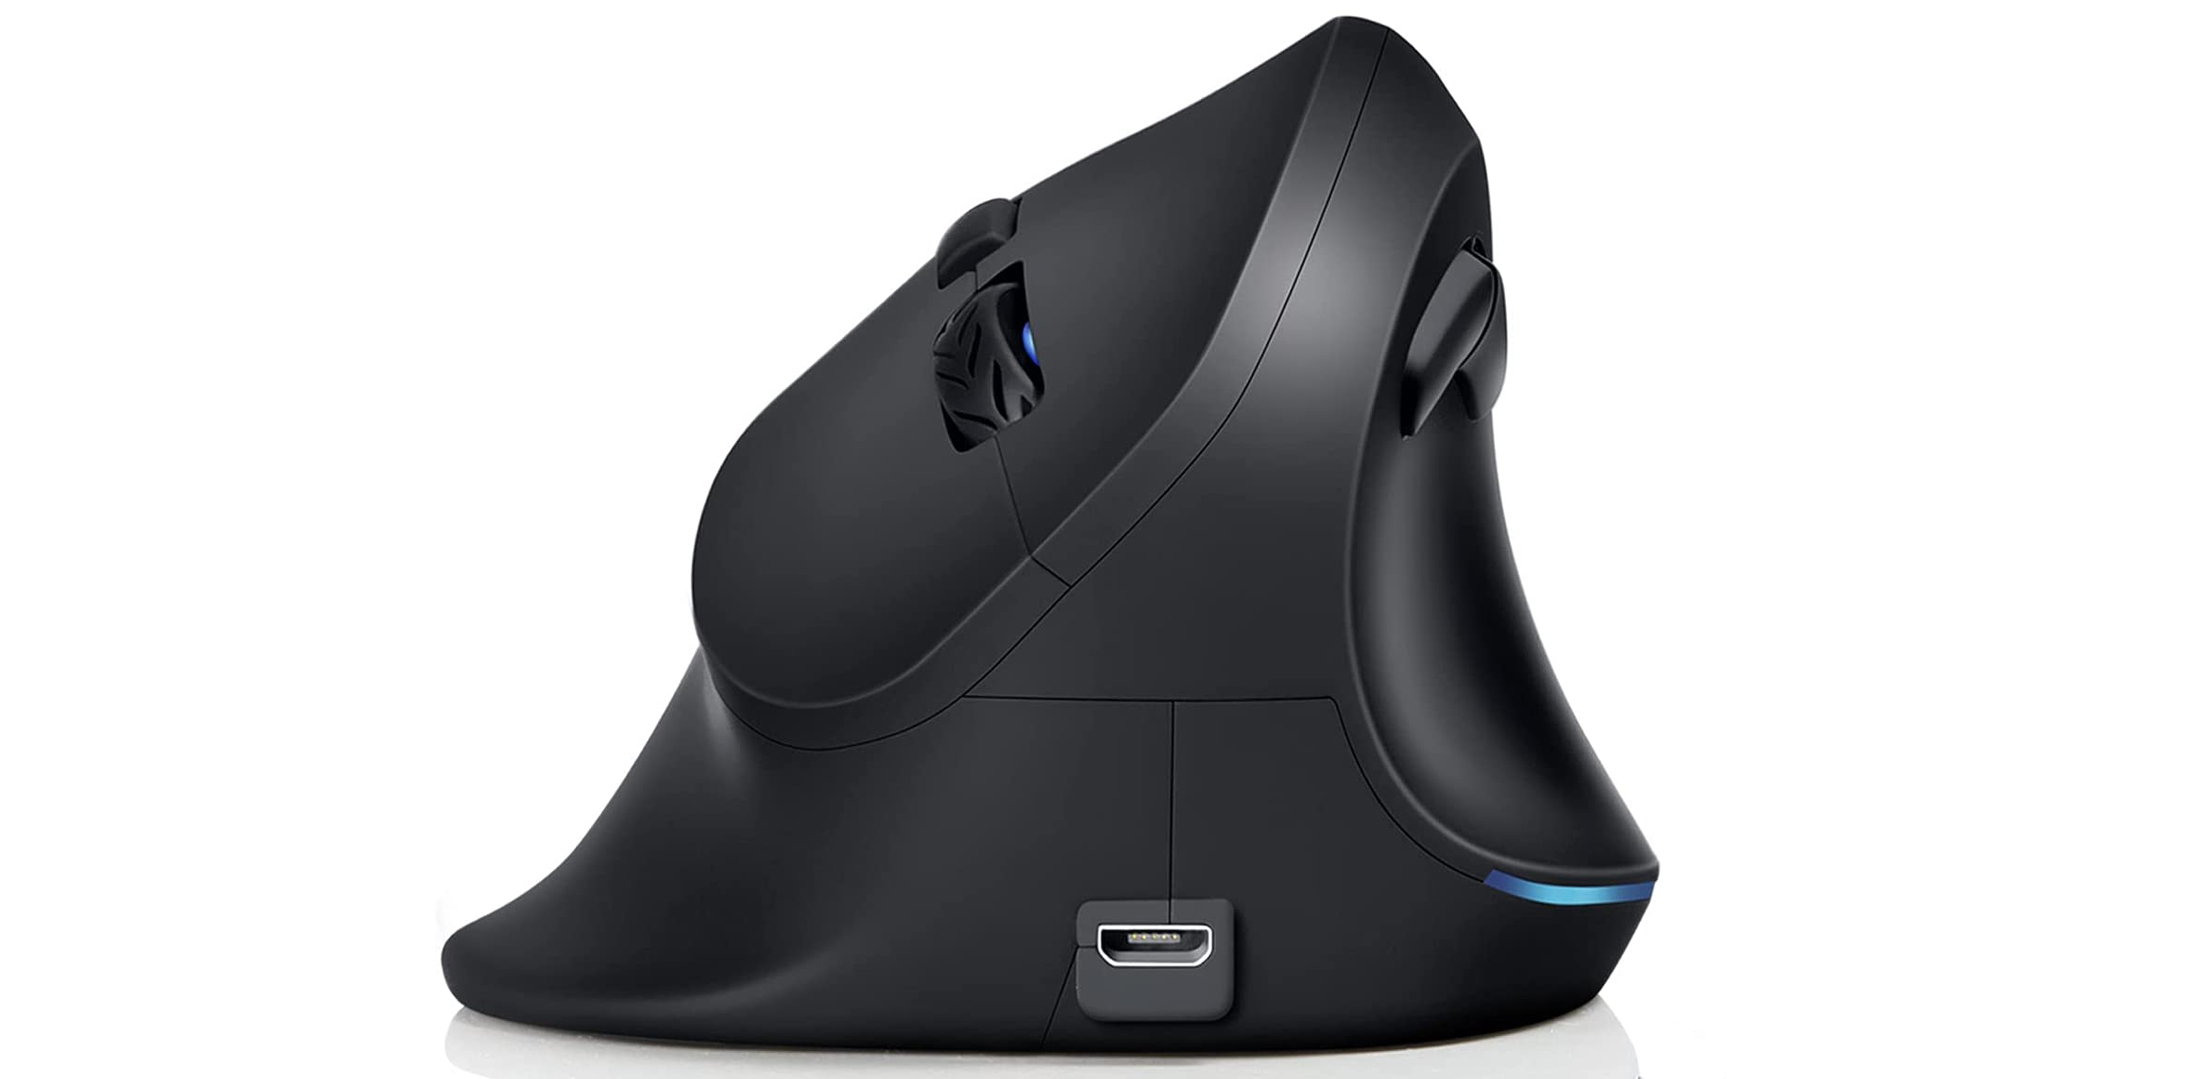 Logitech gets into the vertical mouse game with the MX Vertical